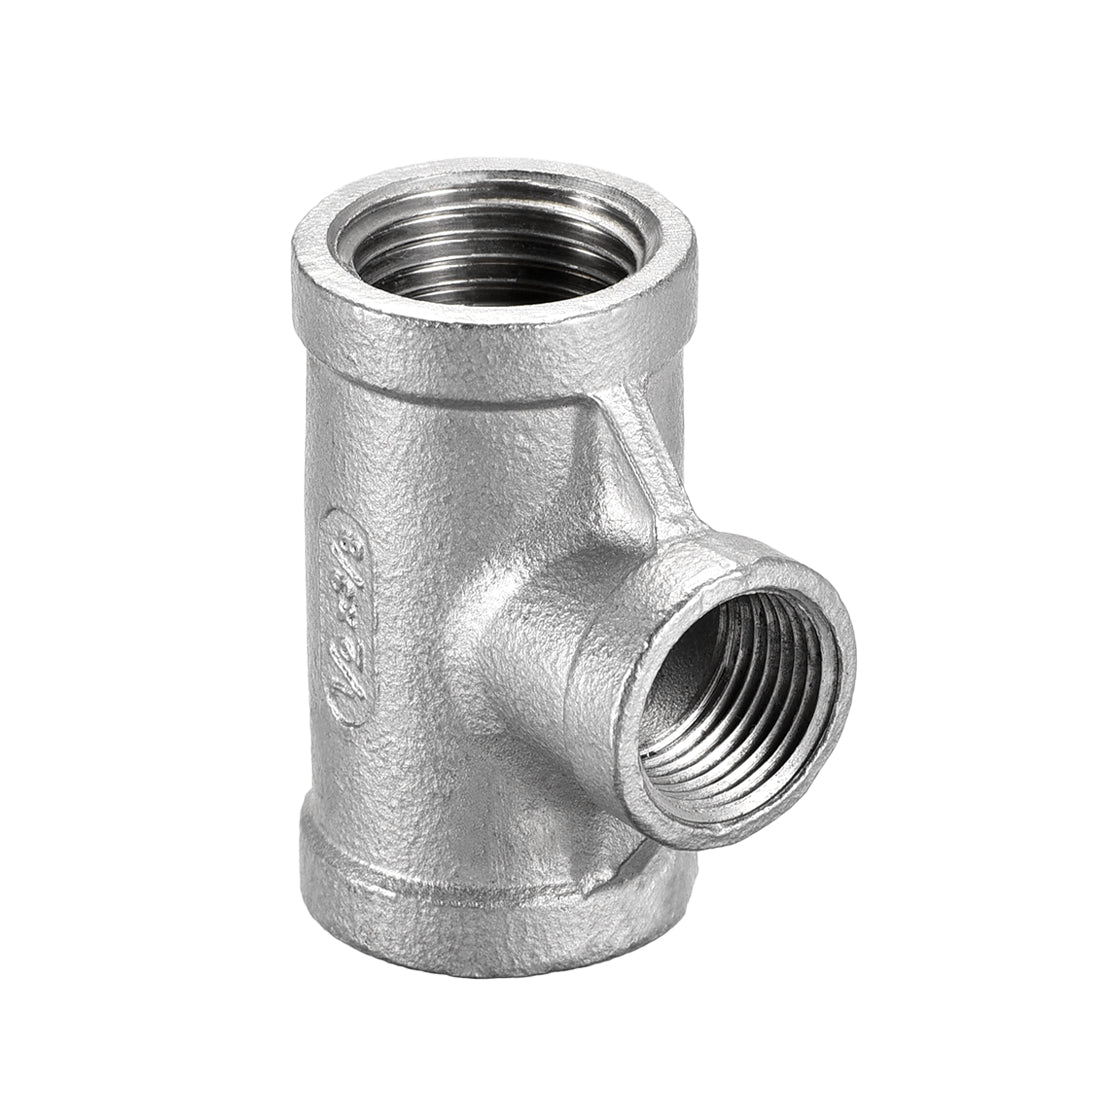 uxcell Uxcell Stainless Steel 304 Cast  Pipe Fitting 1/2 BSPT x 3/8 BSPT x 1/2 BSPT Female Tee Shaped Connector Coupler